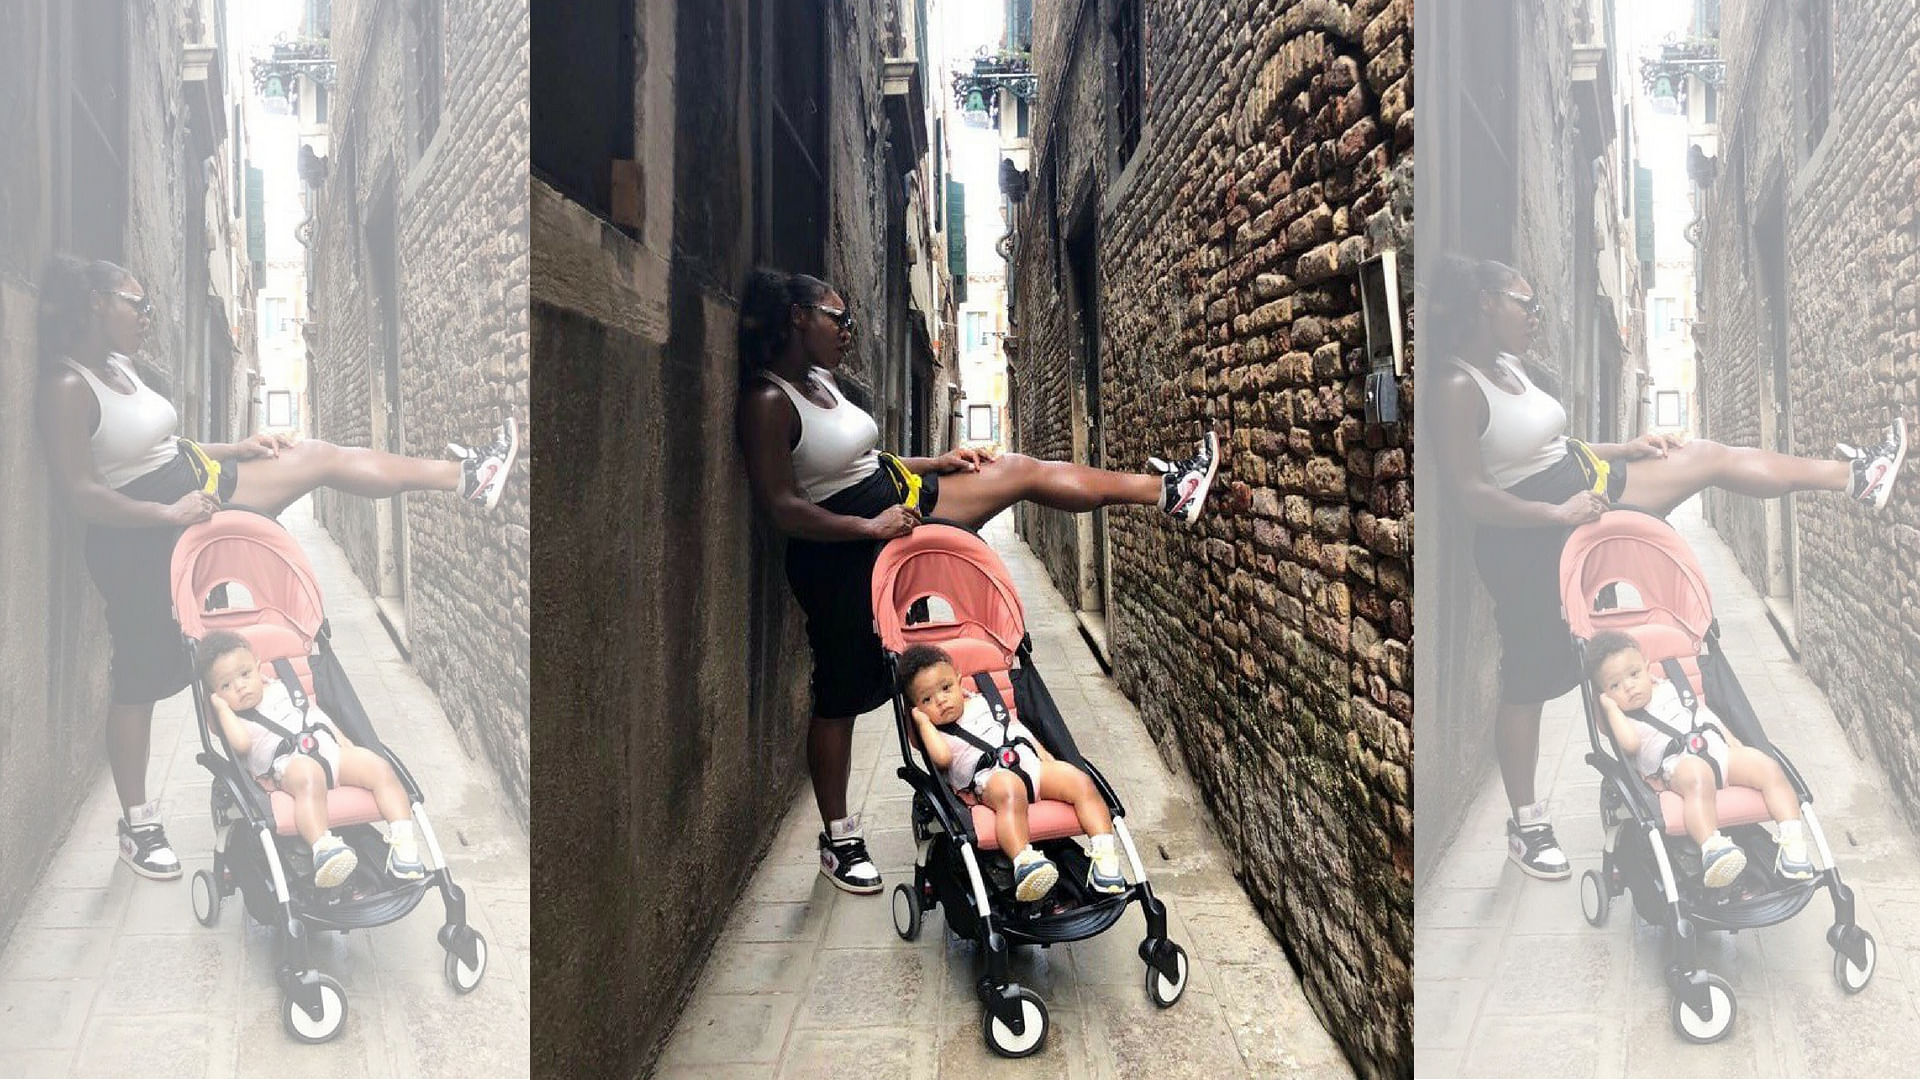 Serena Williams shared this picture with her daughter, encouraging women to talk about motherhood.